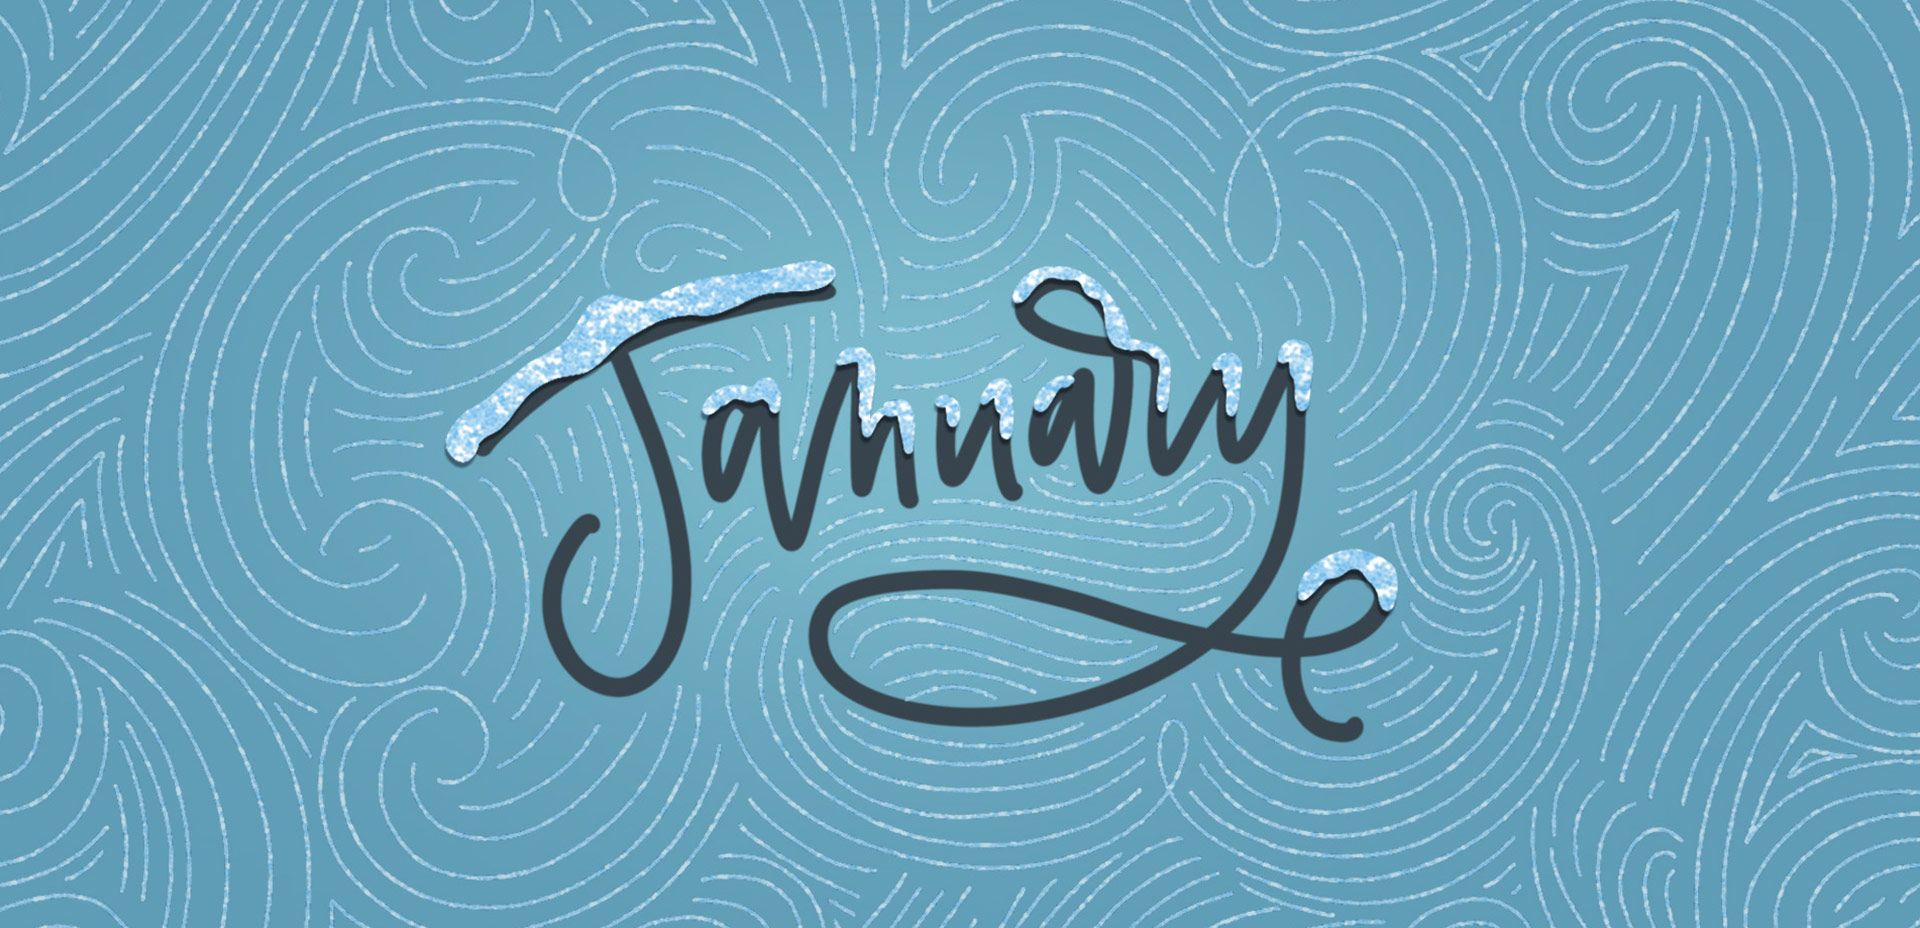 Blue background with white swirls and the word January in black - January